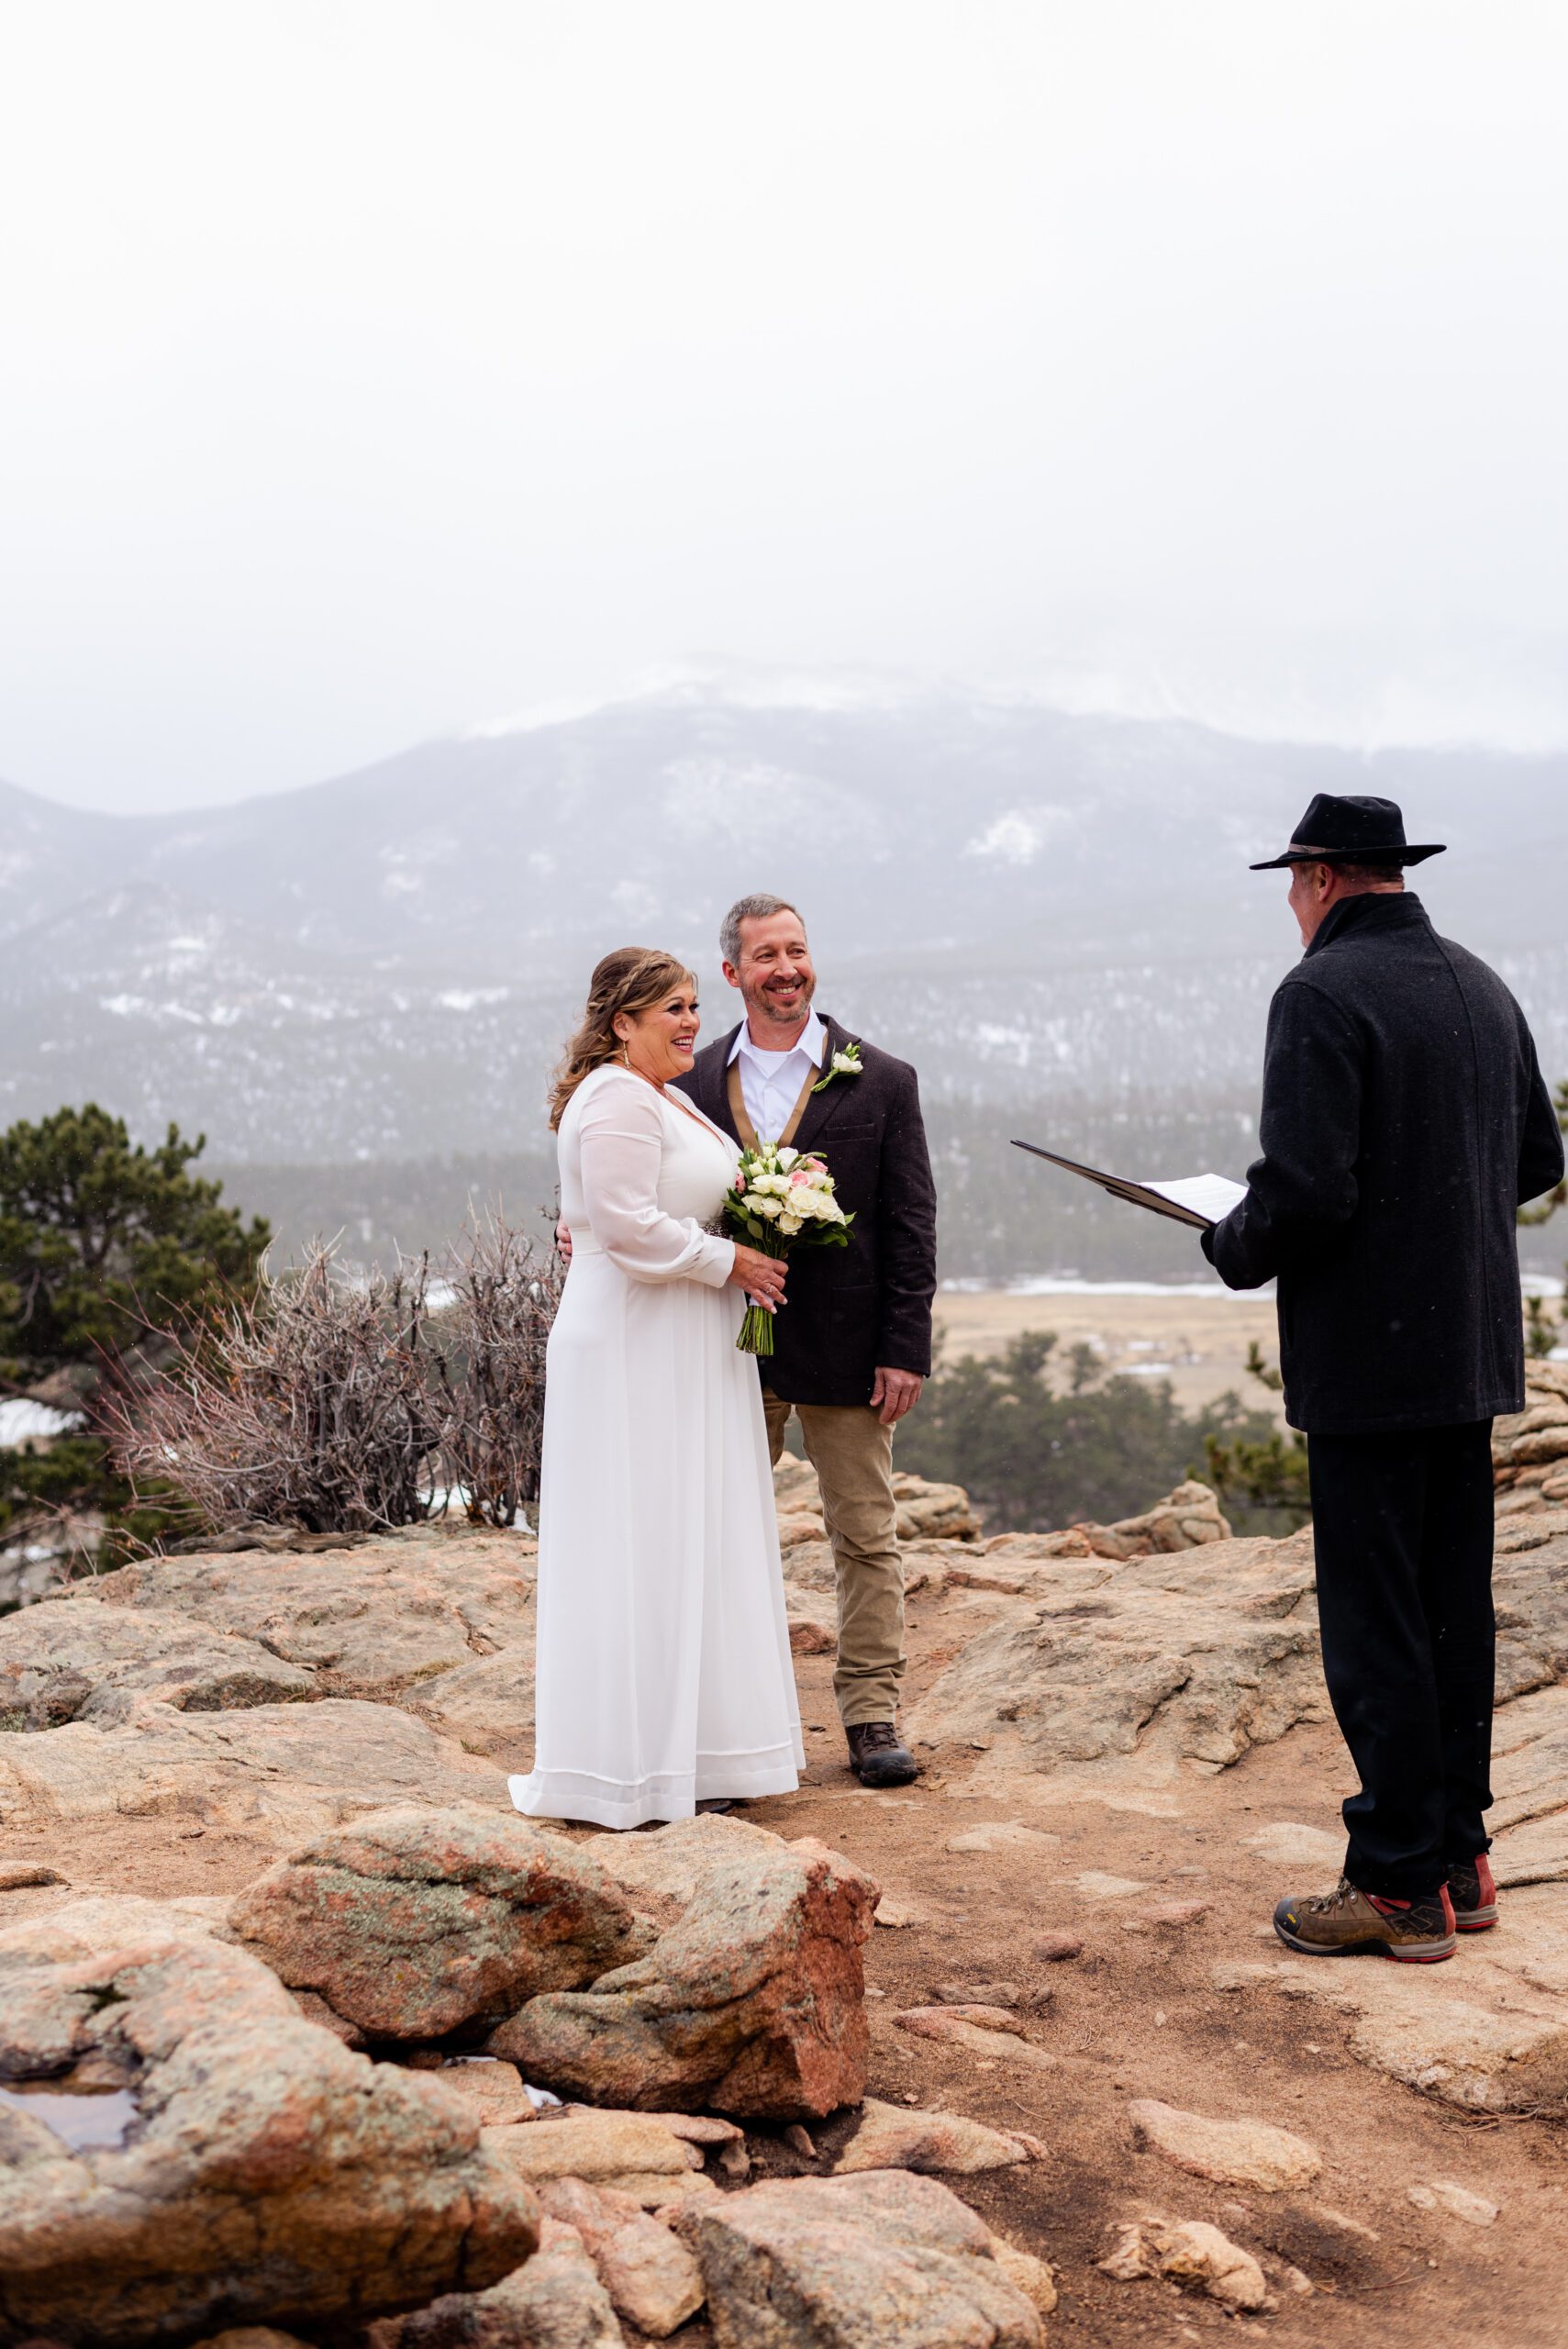 the bride and groom smile at the officiant during their ceremony for their spring elopement at 3M Curve.